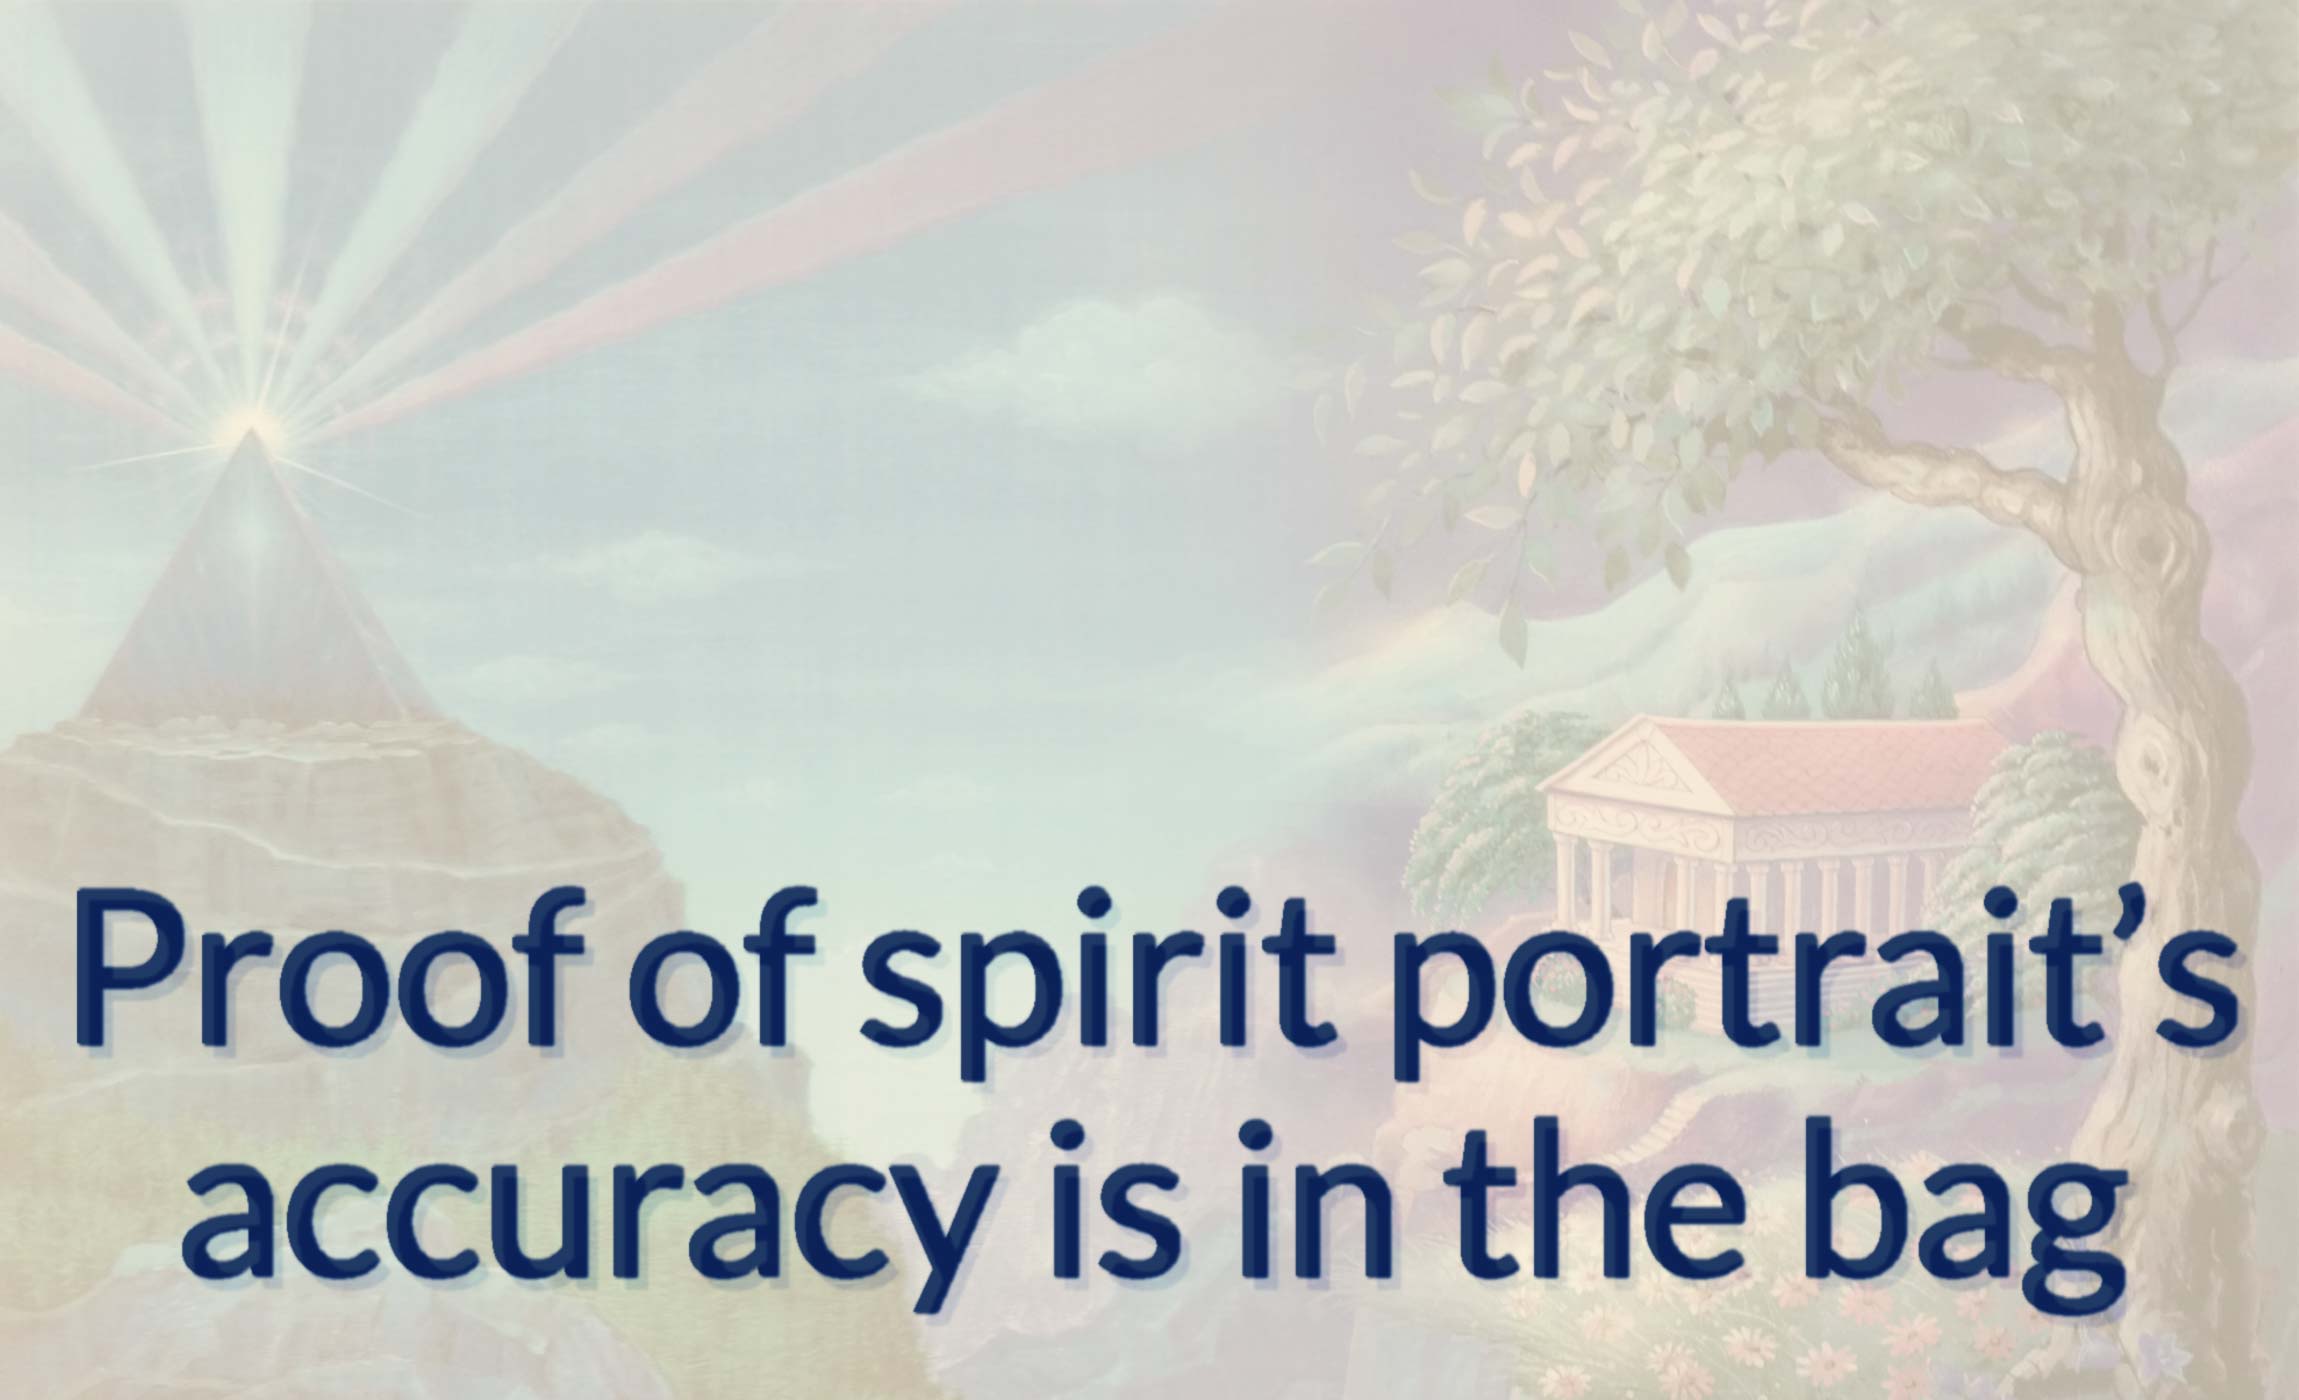 Proof of spirit portrait’s accuracy is in the bag 